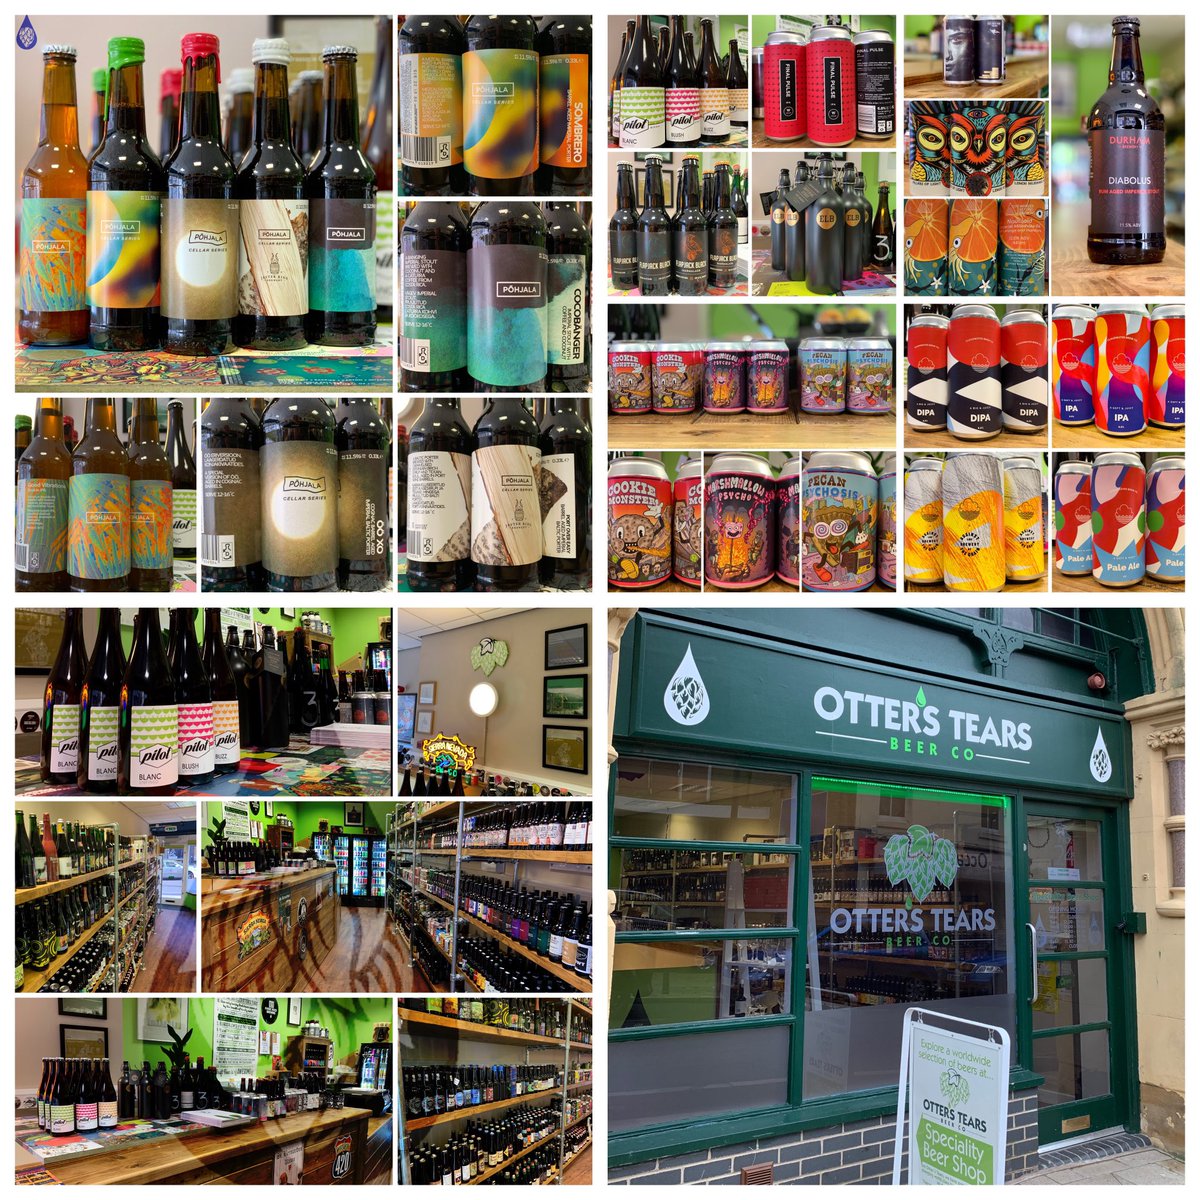 I am a proud independent shop owner. Investing in the highest quality & variety, sold at a fair price. I offer friendly, personalised customer service. I CARE about beer & always have. Supermarkets can’t loss lead that... #qualitynotcommodity #supportlocal #craftbeer #PleaseShare